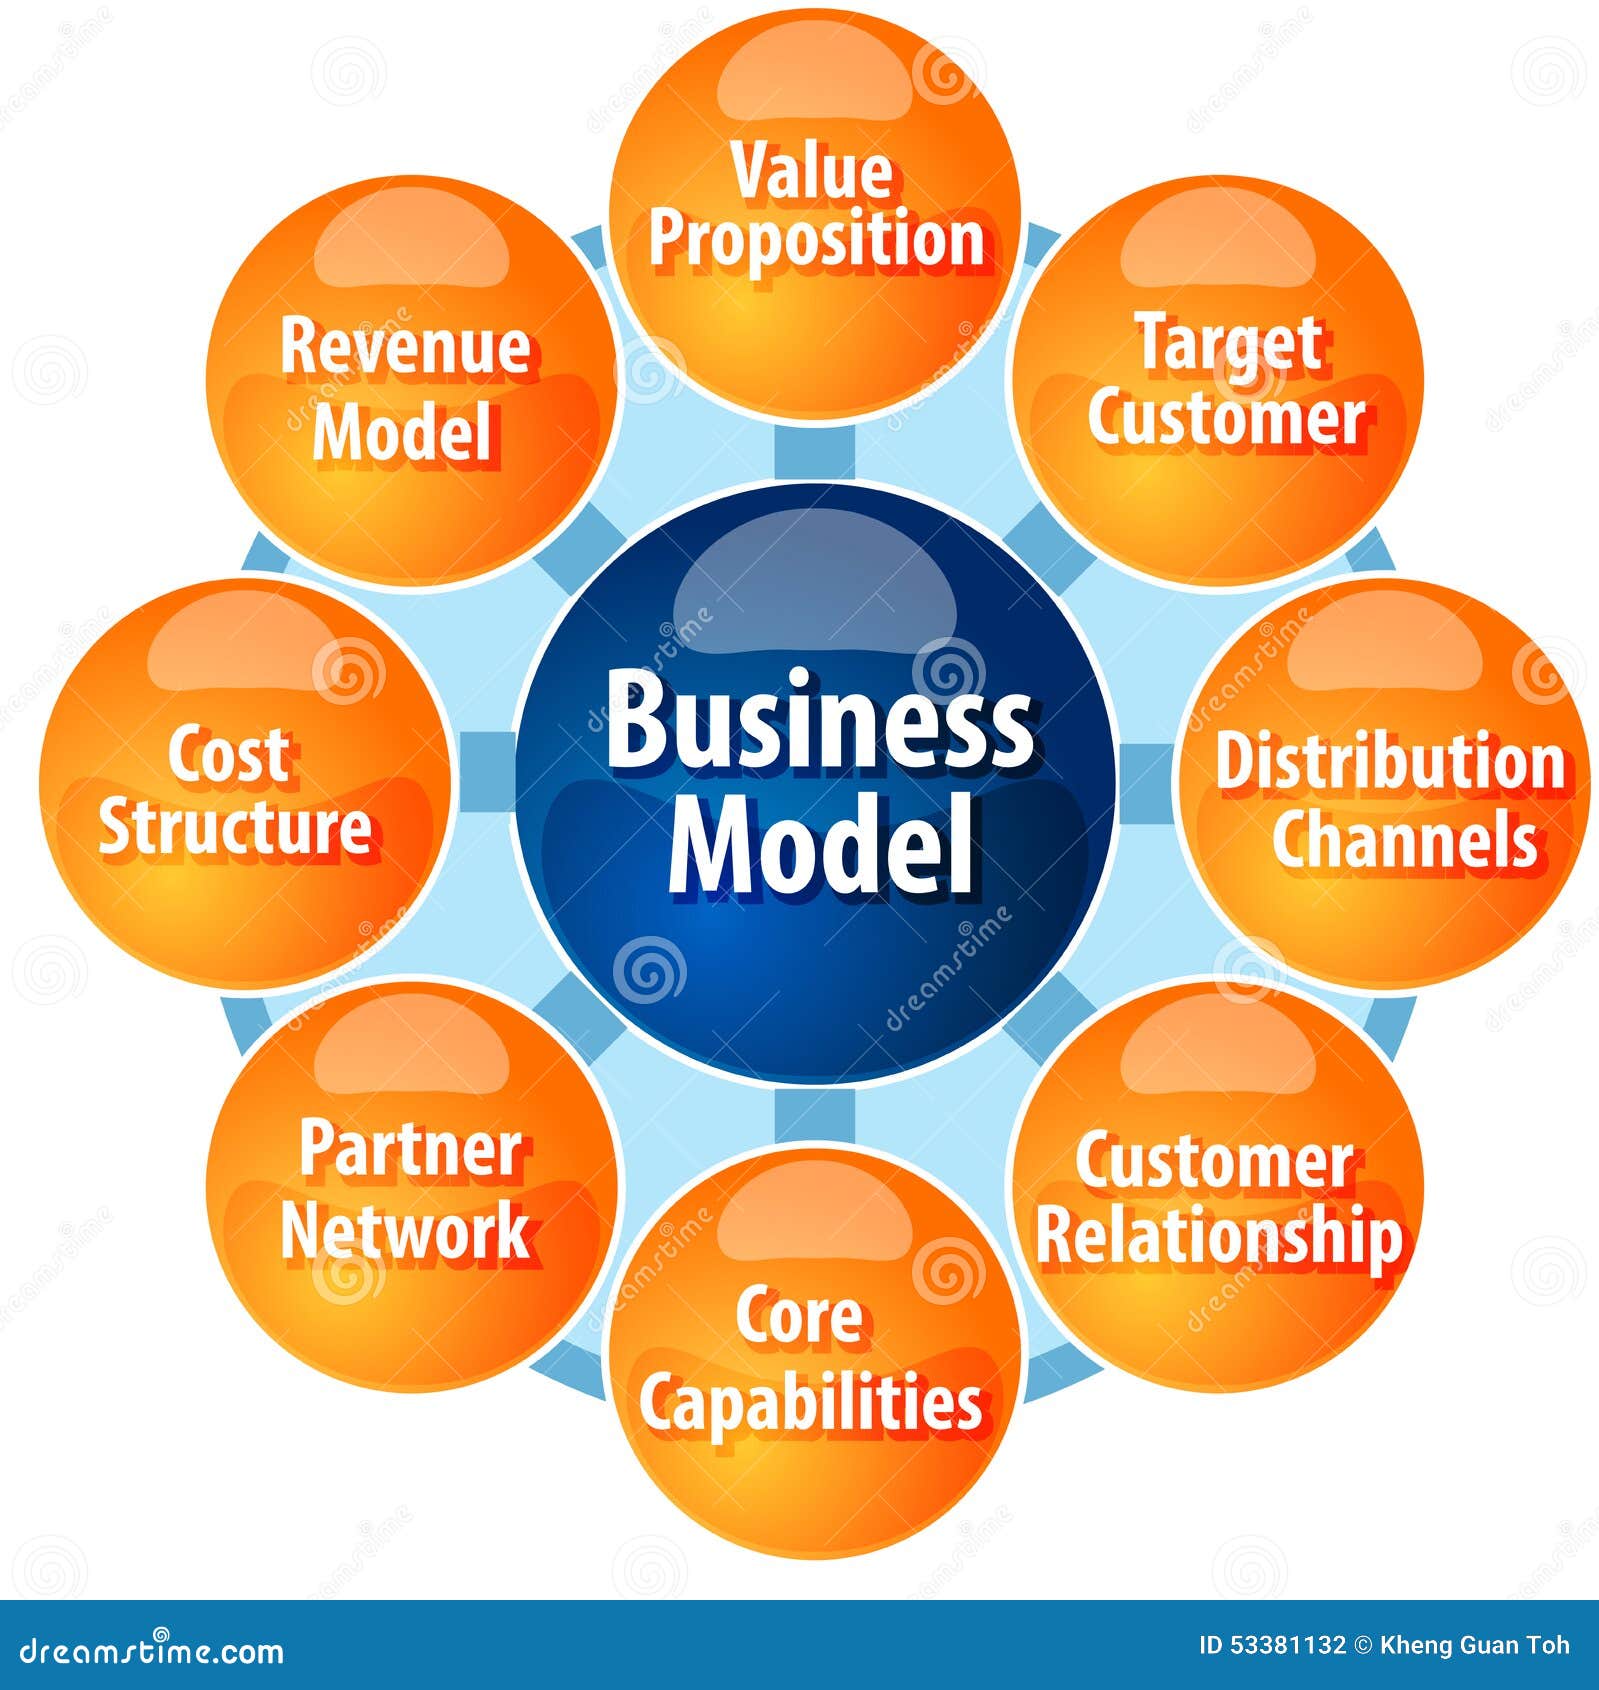 4 major components of business model